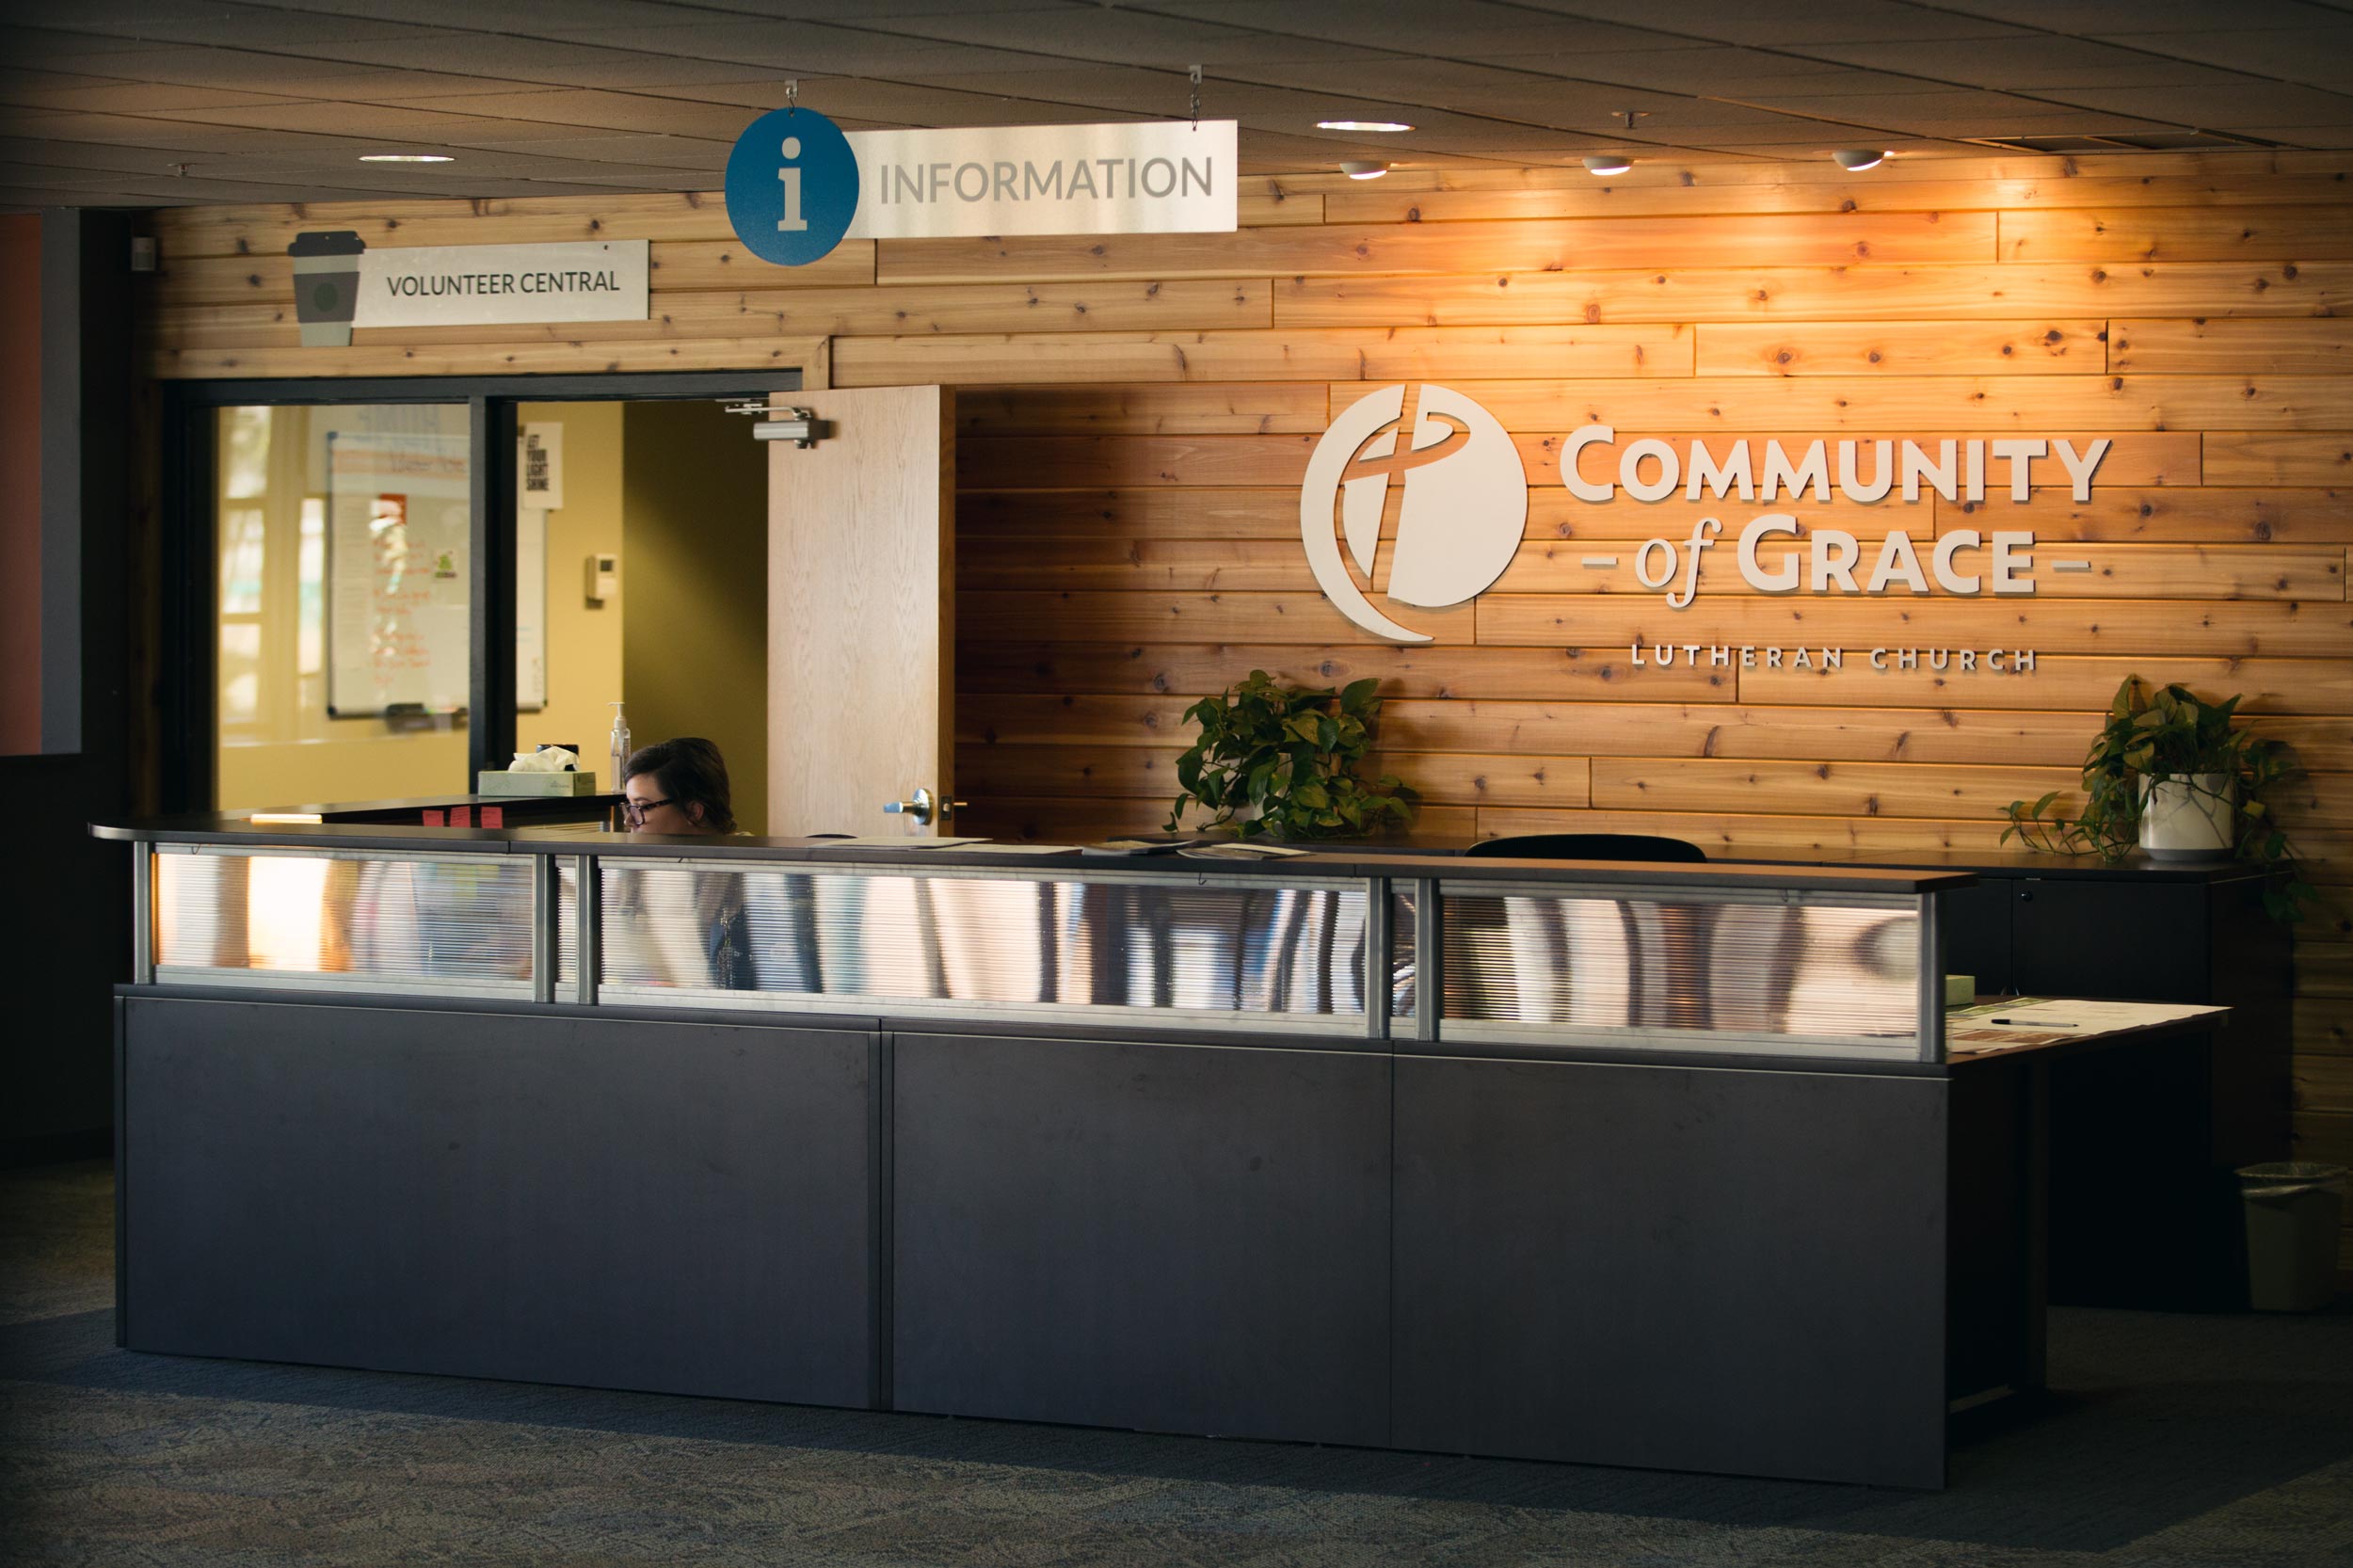 Branded reception desk wall at Community of Grace